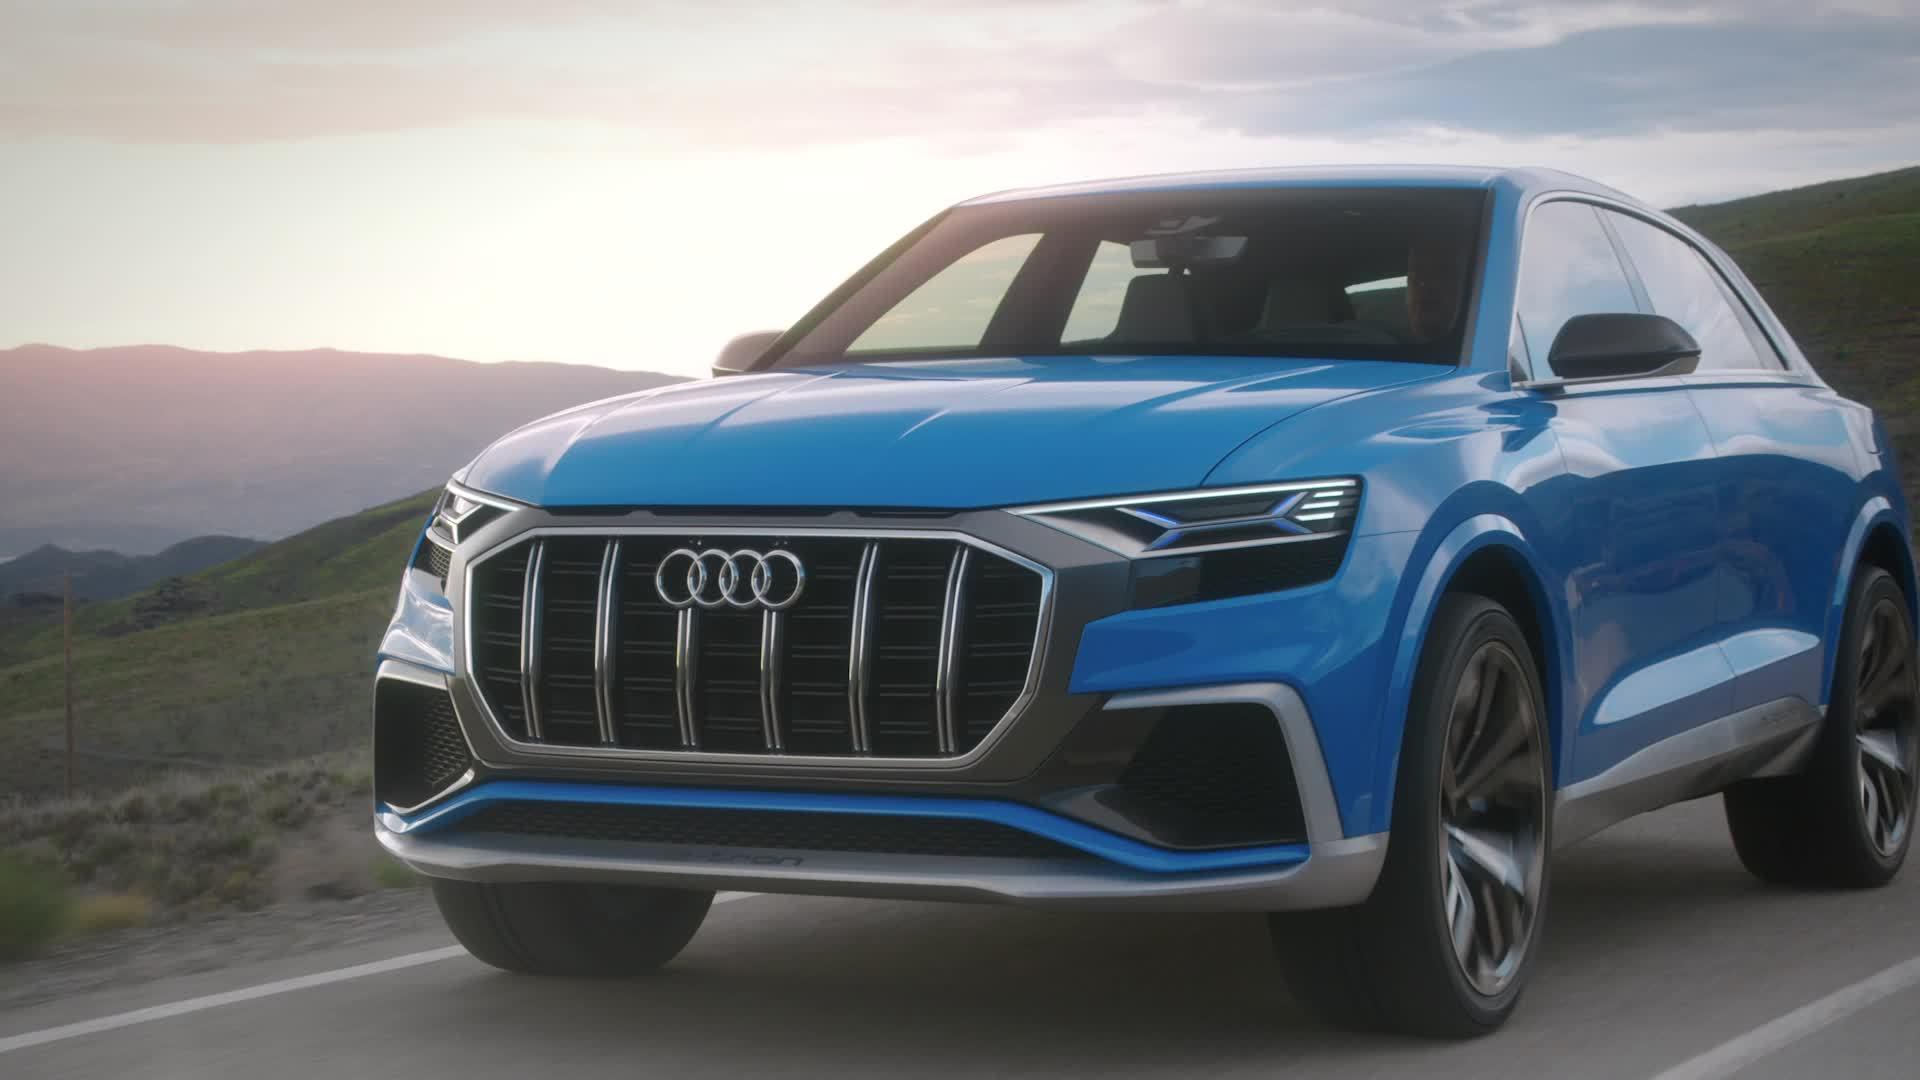 Audi Q8 Picture Gallery and save ideas about Car design